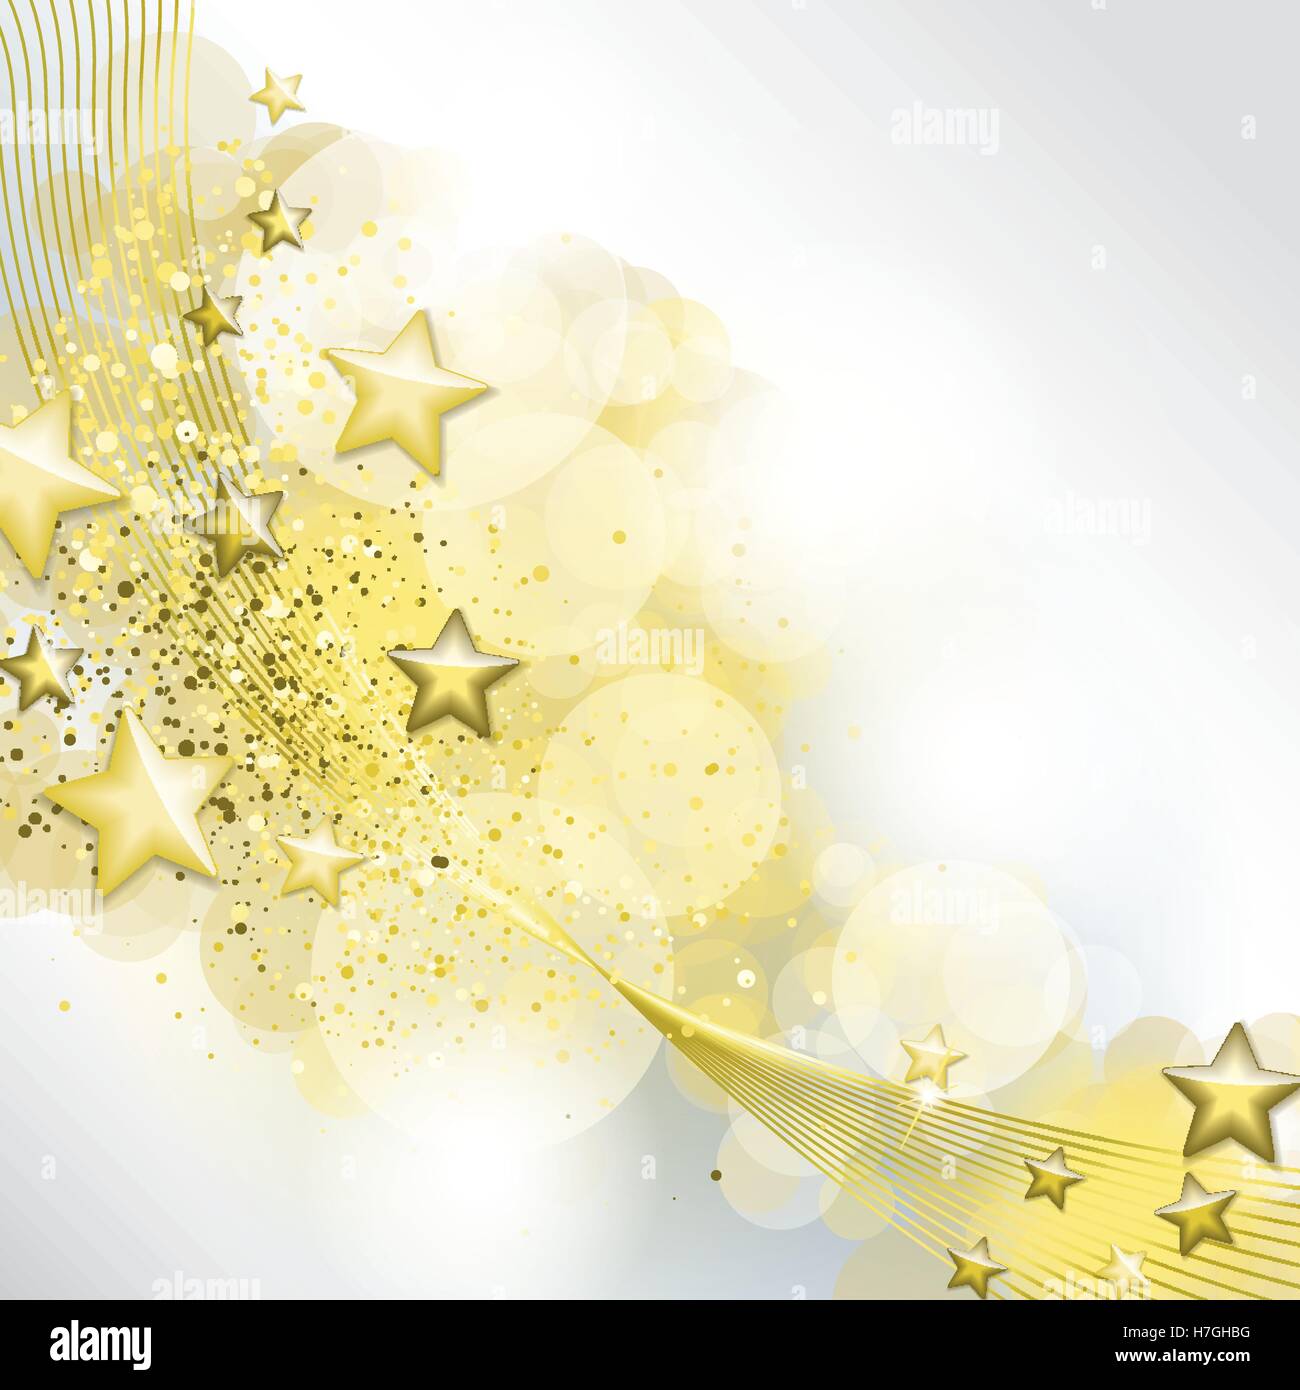 White and gold background full vector elements Stock Vector